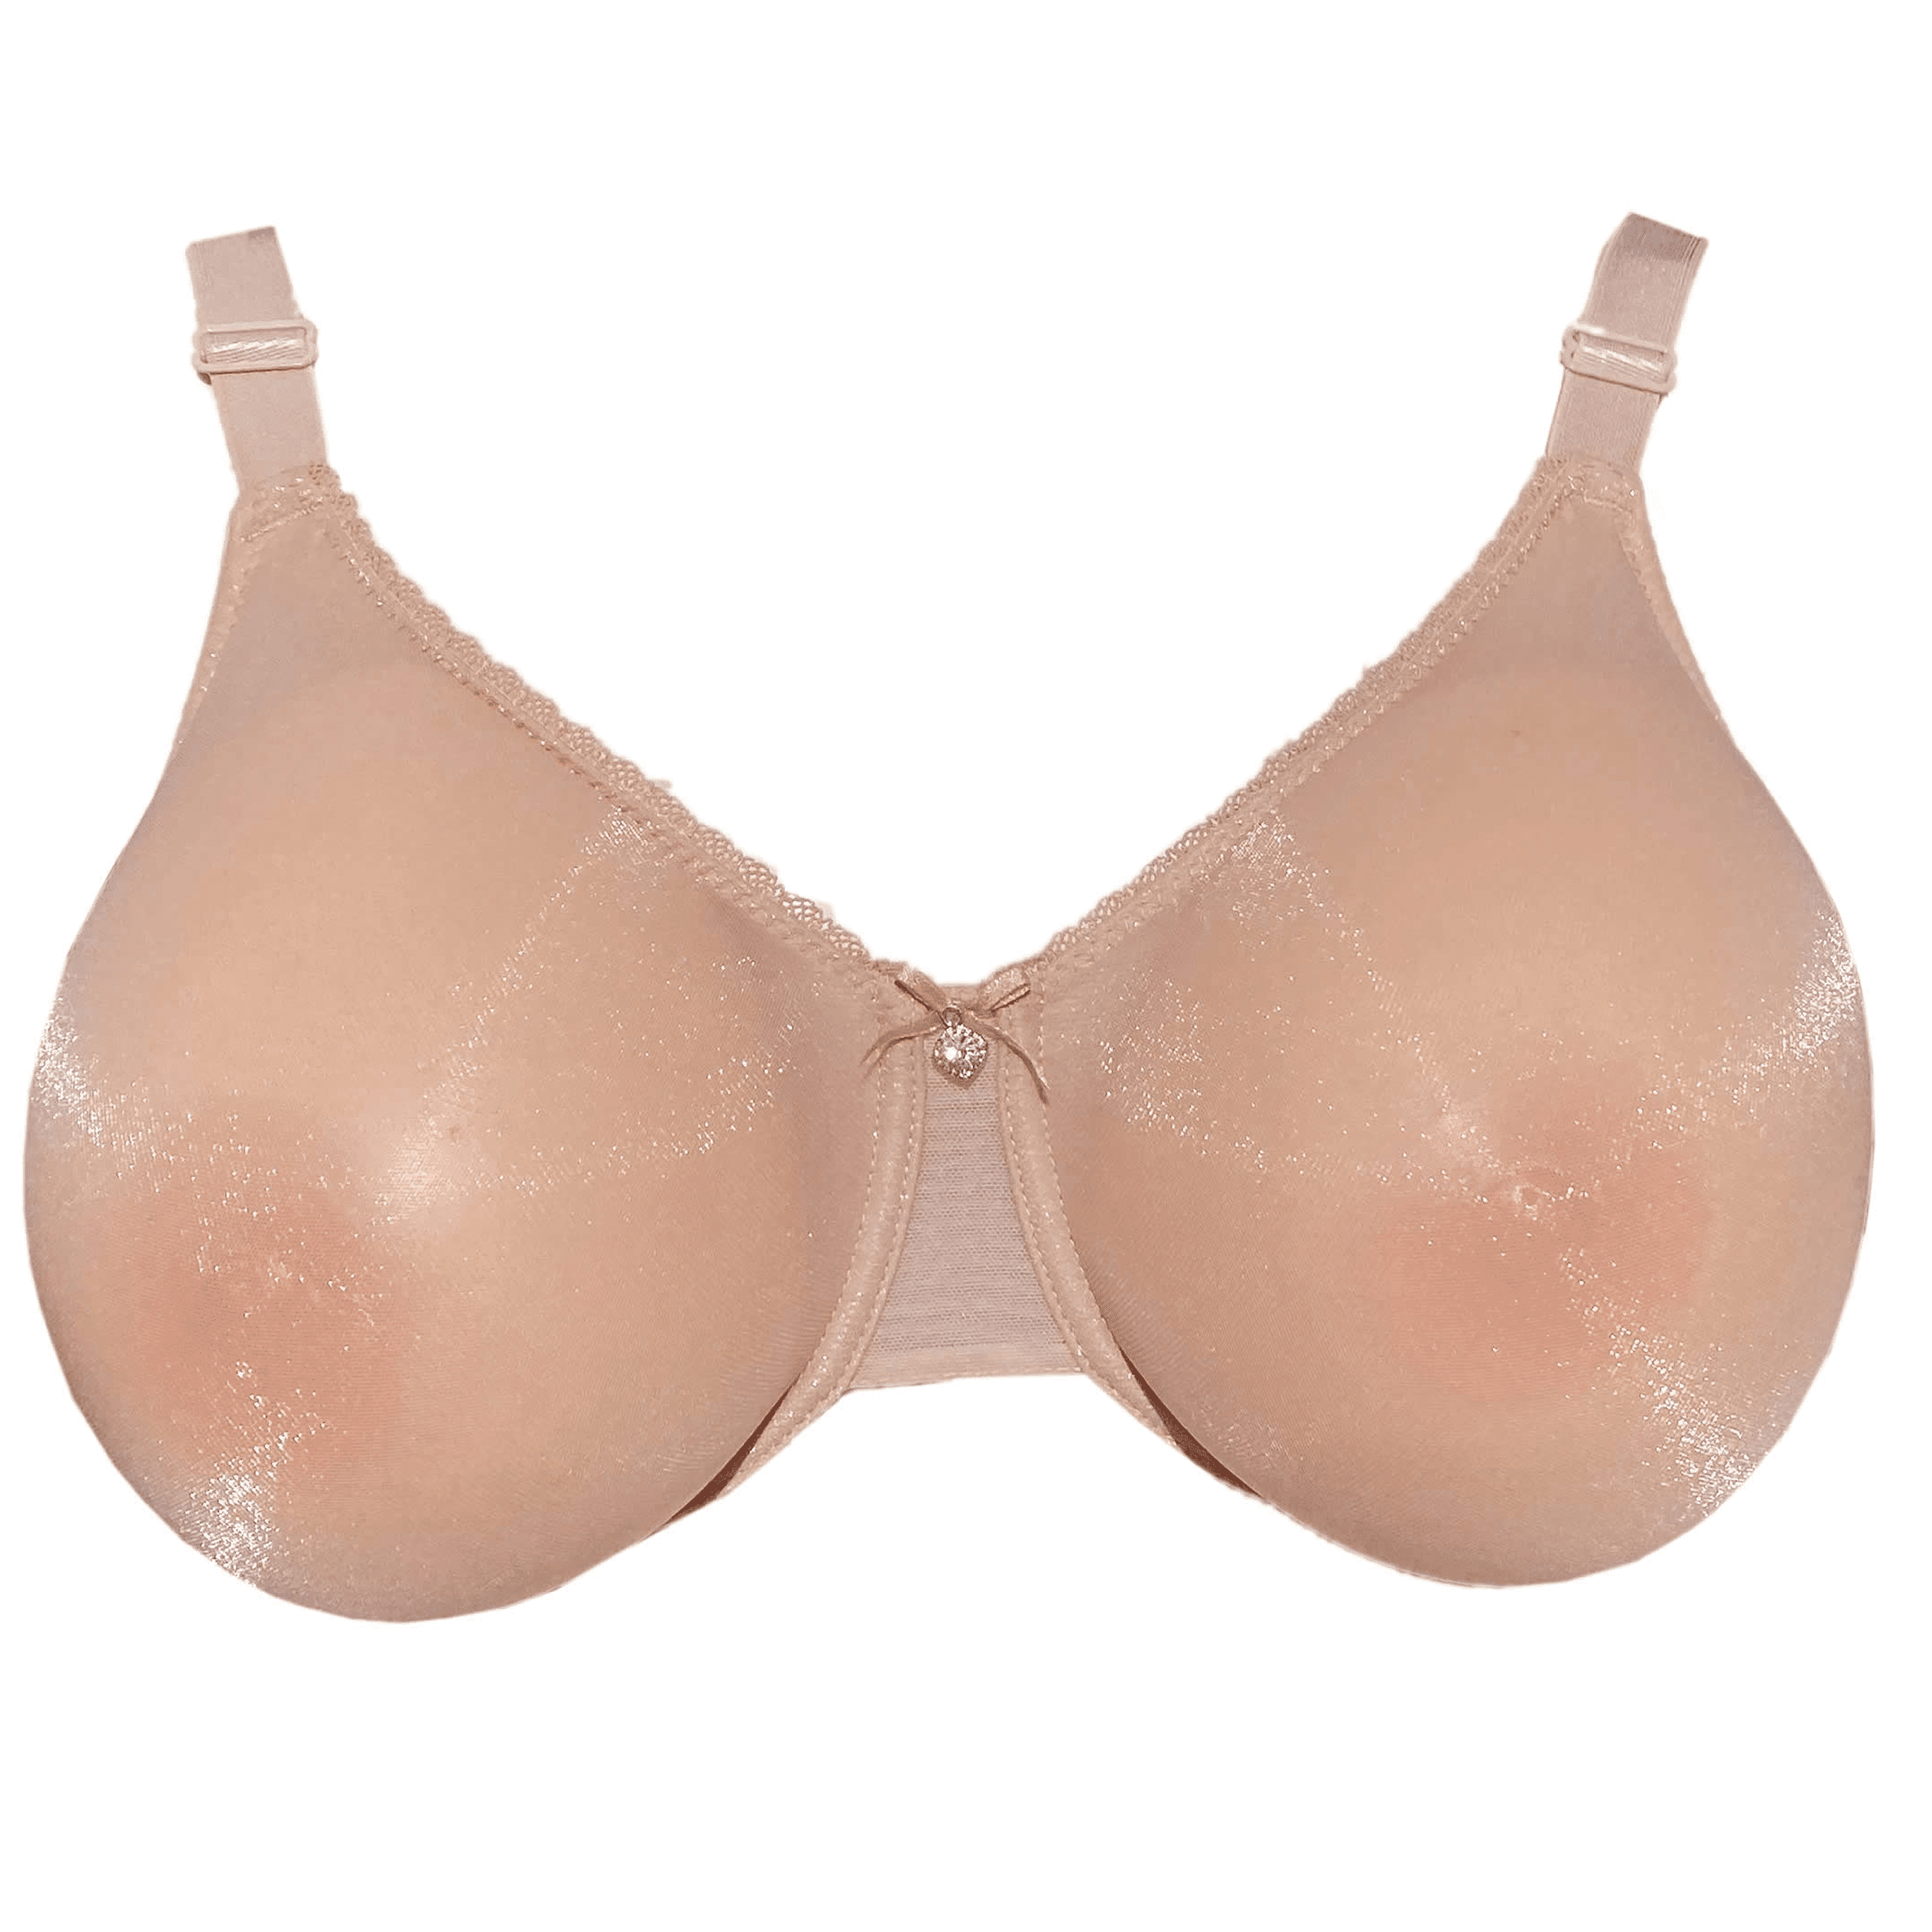 Shop Breast Prostheses